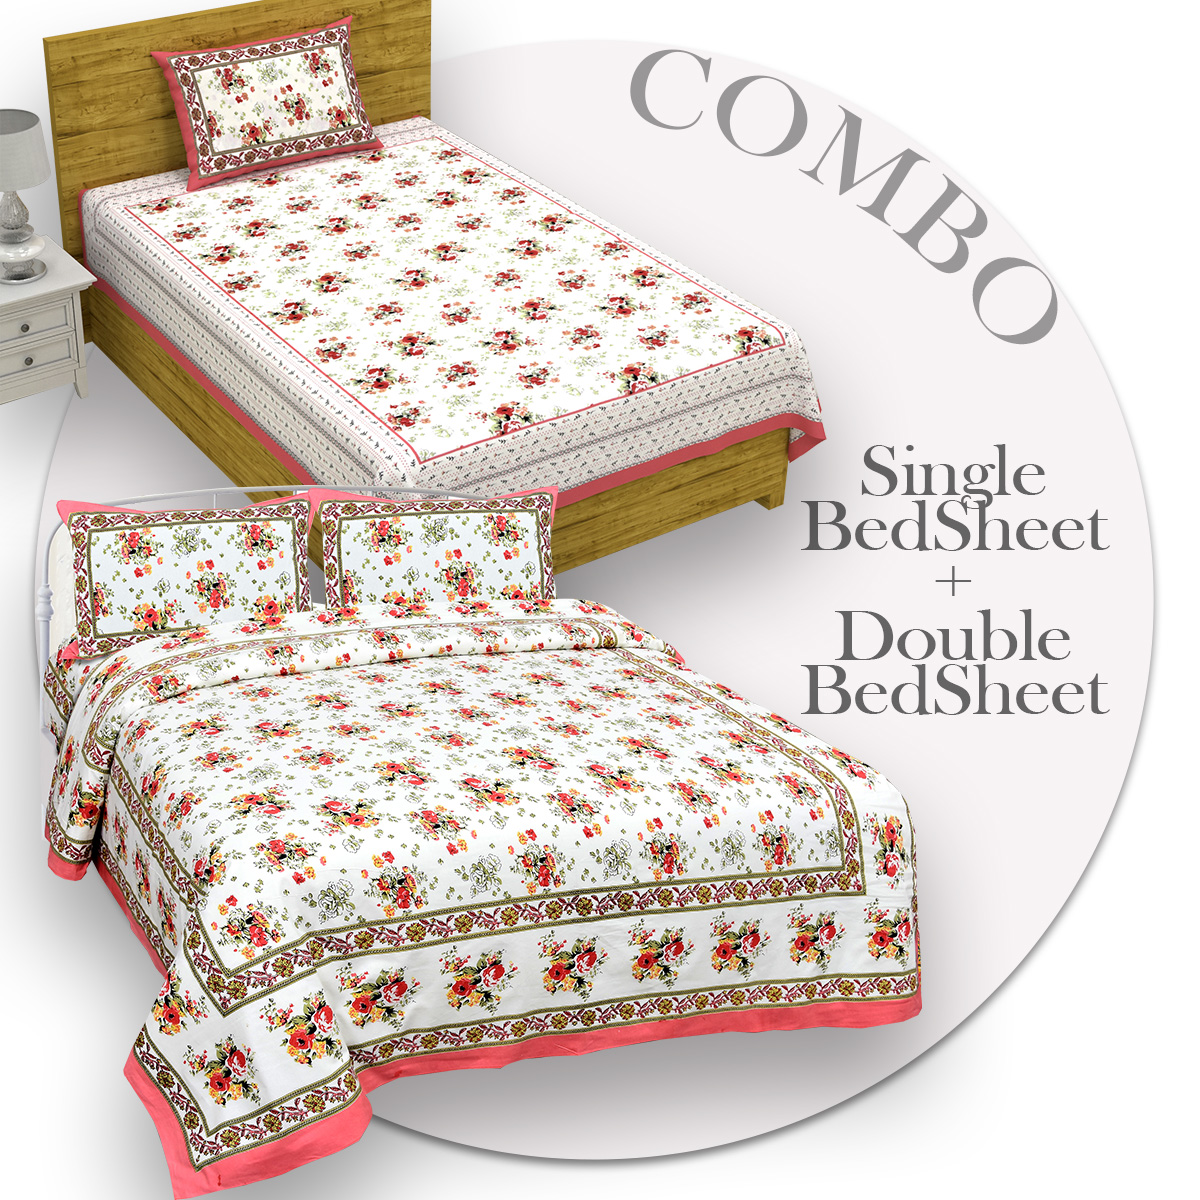 COMBO369 Beautiful Pink Colour Combo Set of 1 Single and 1 Double Bedsheet With 3 Pillow Cover